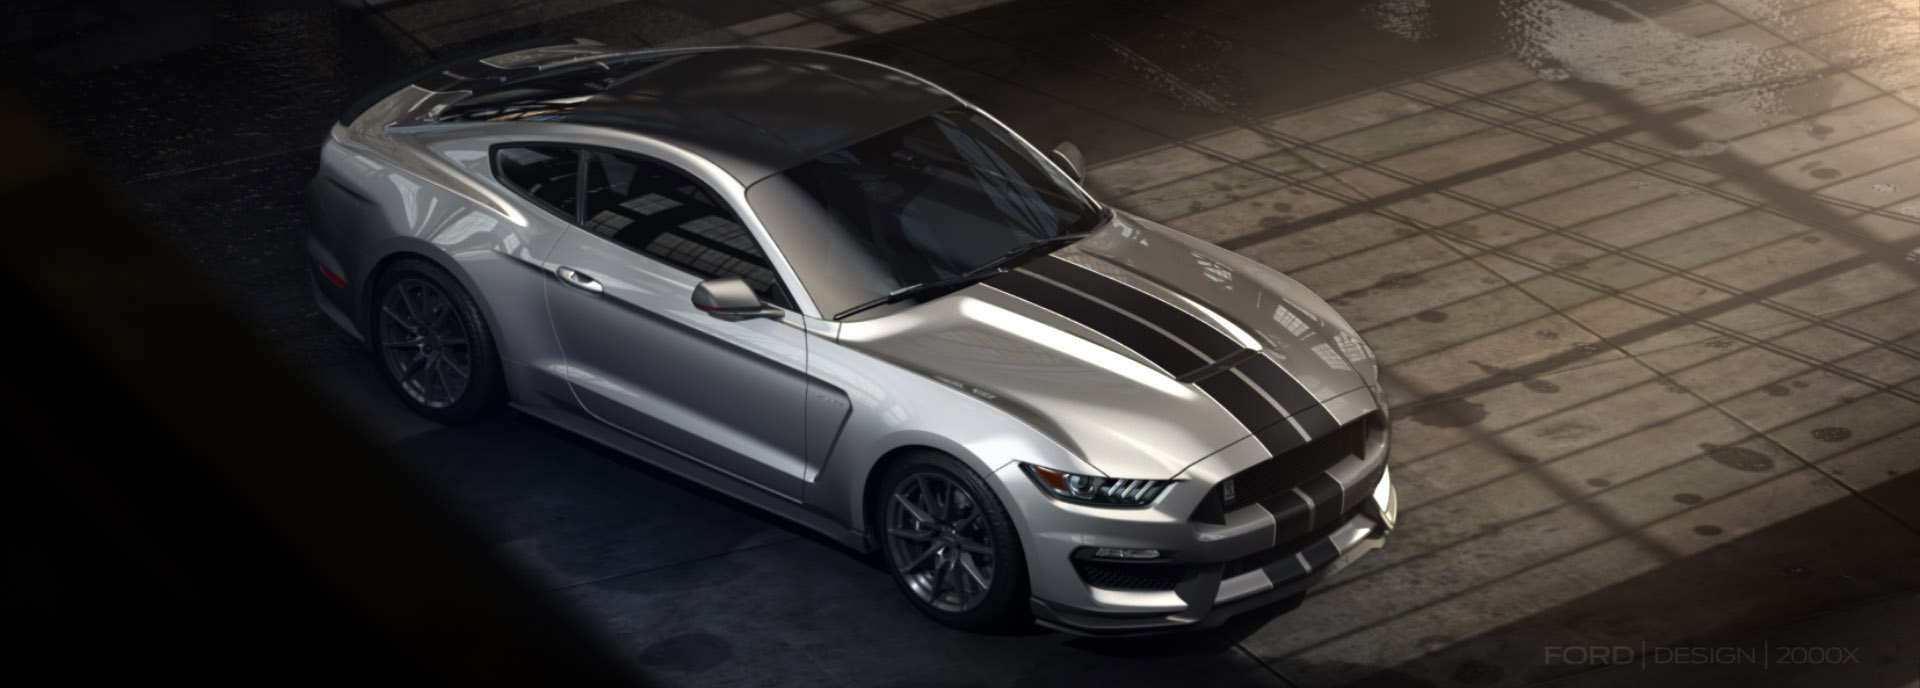 Ford Mustang Shelby GT350 photo #2